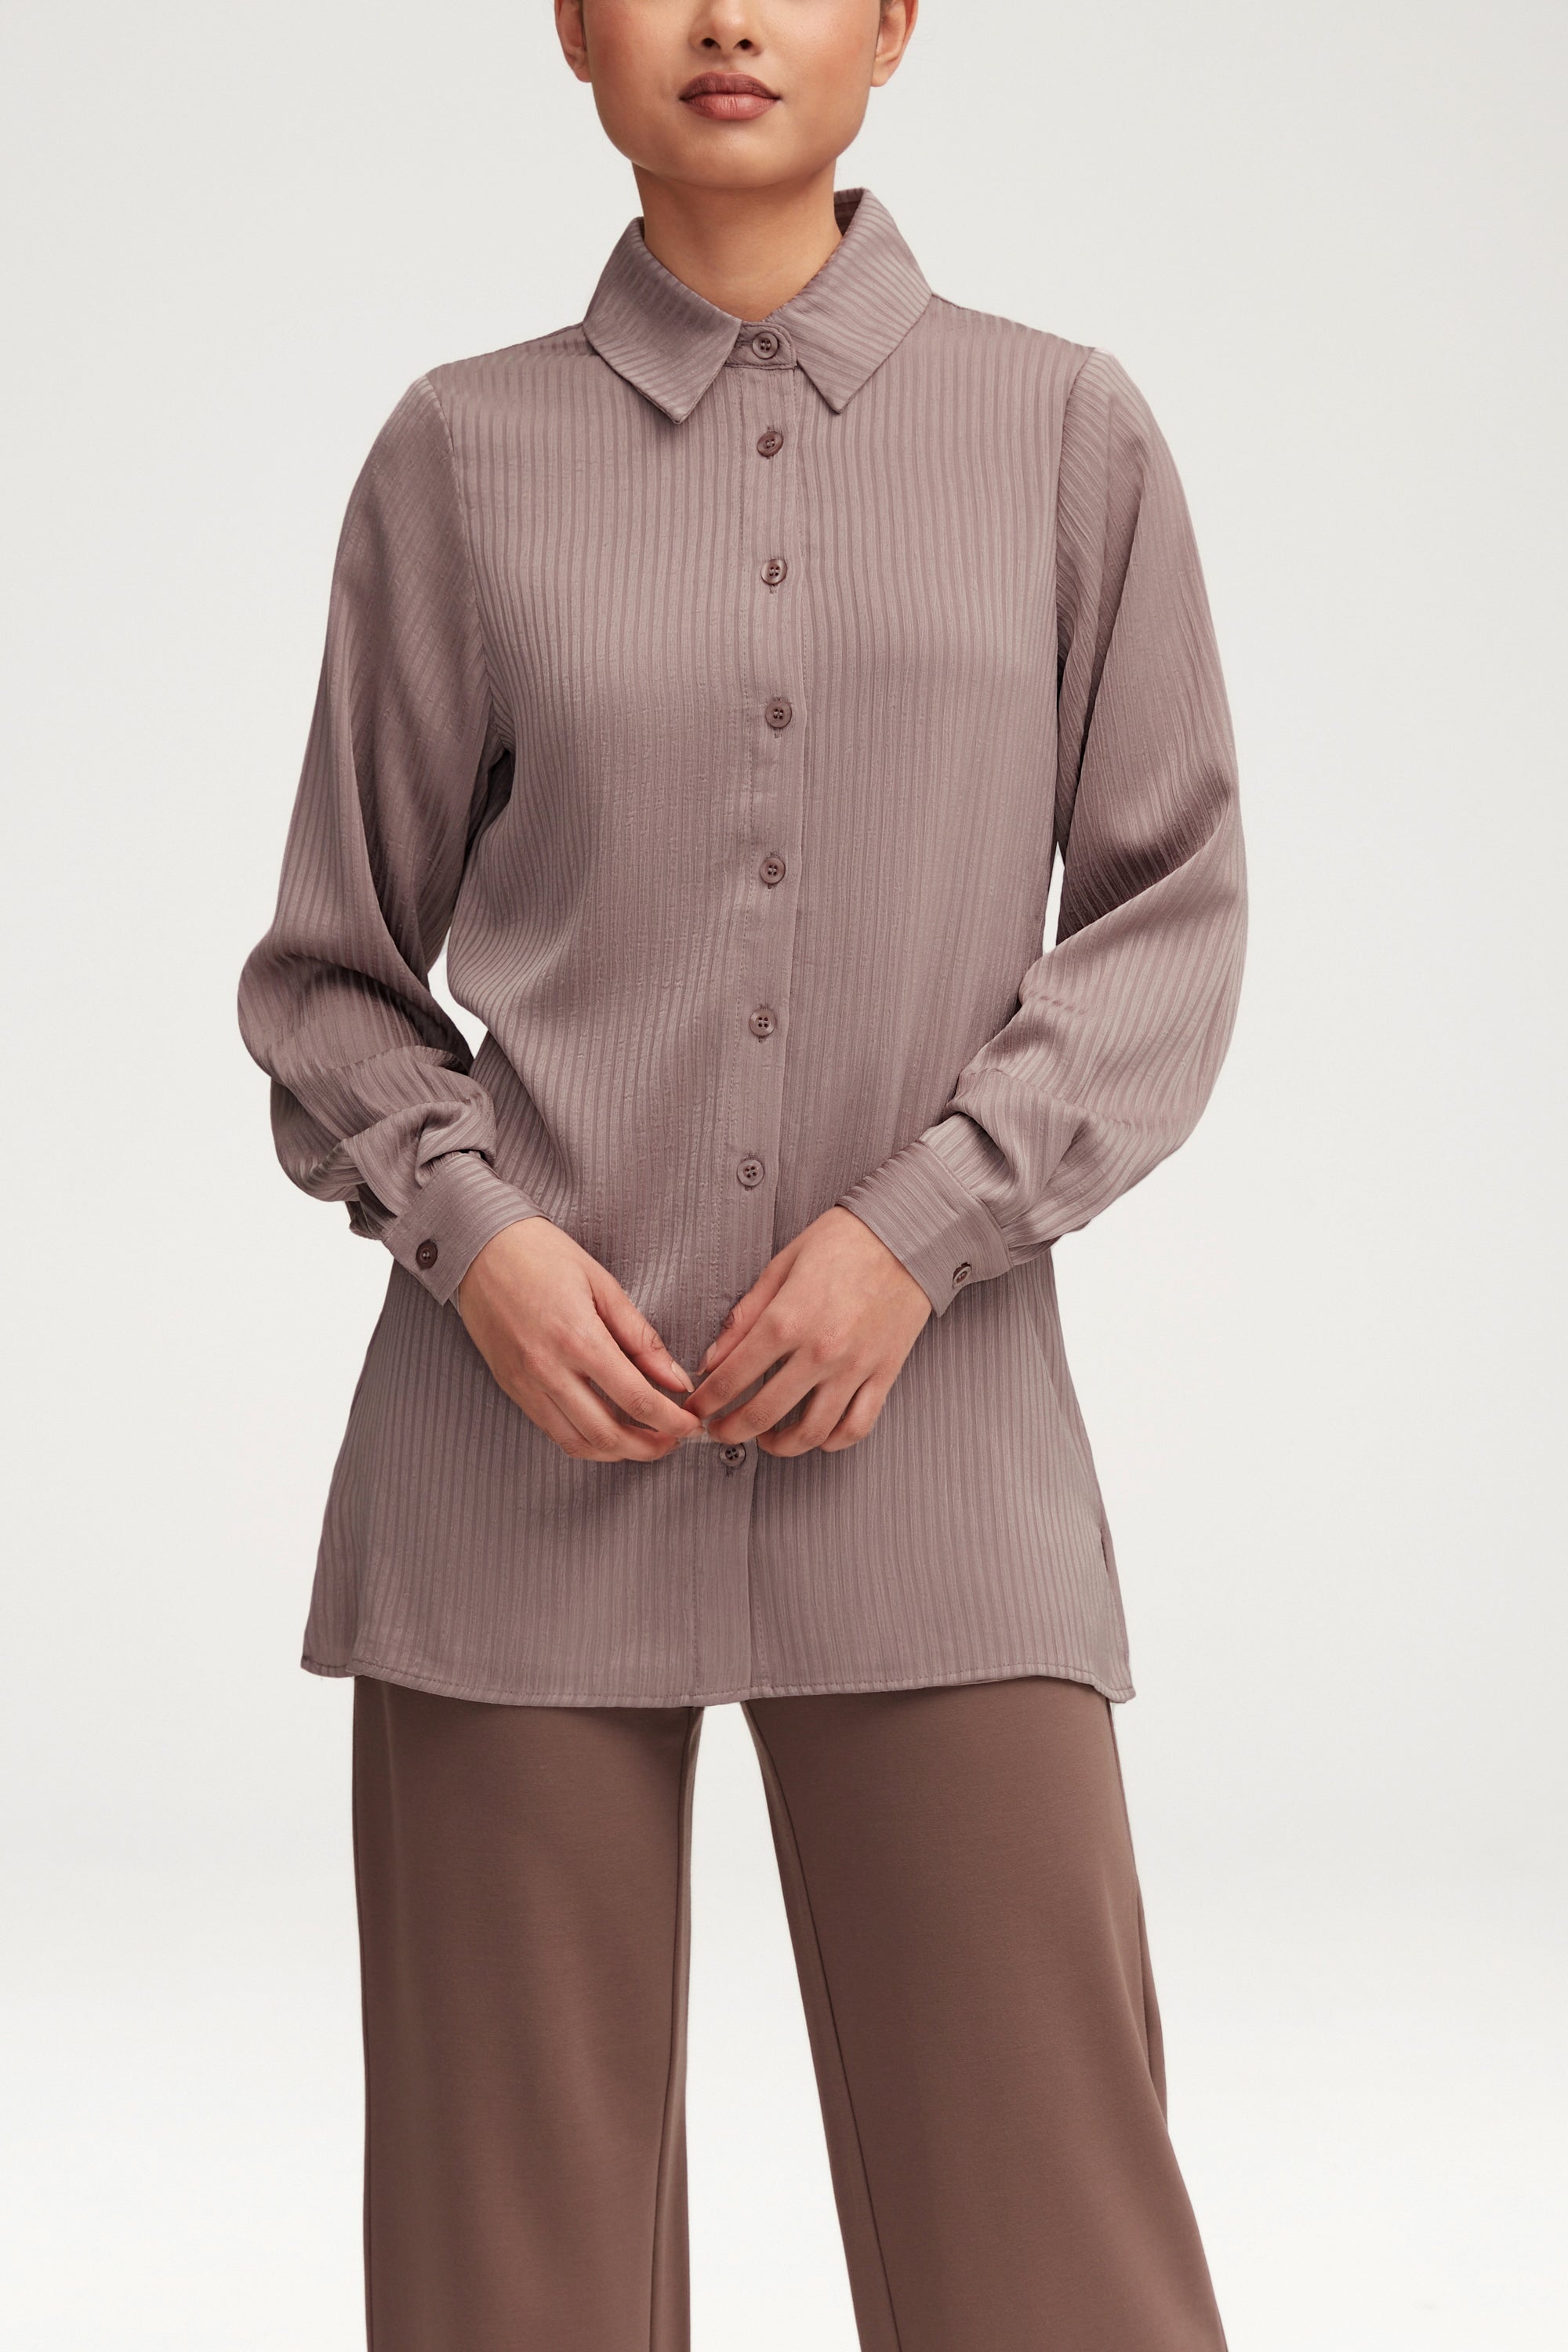 Jaserah Button Down Top - Taupe Clothing Veiled 